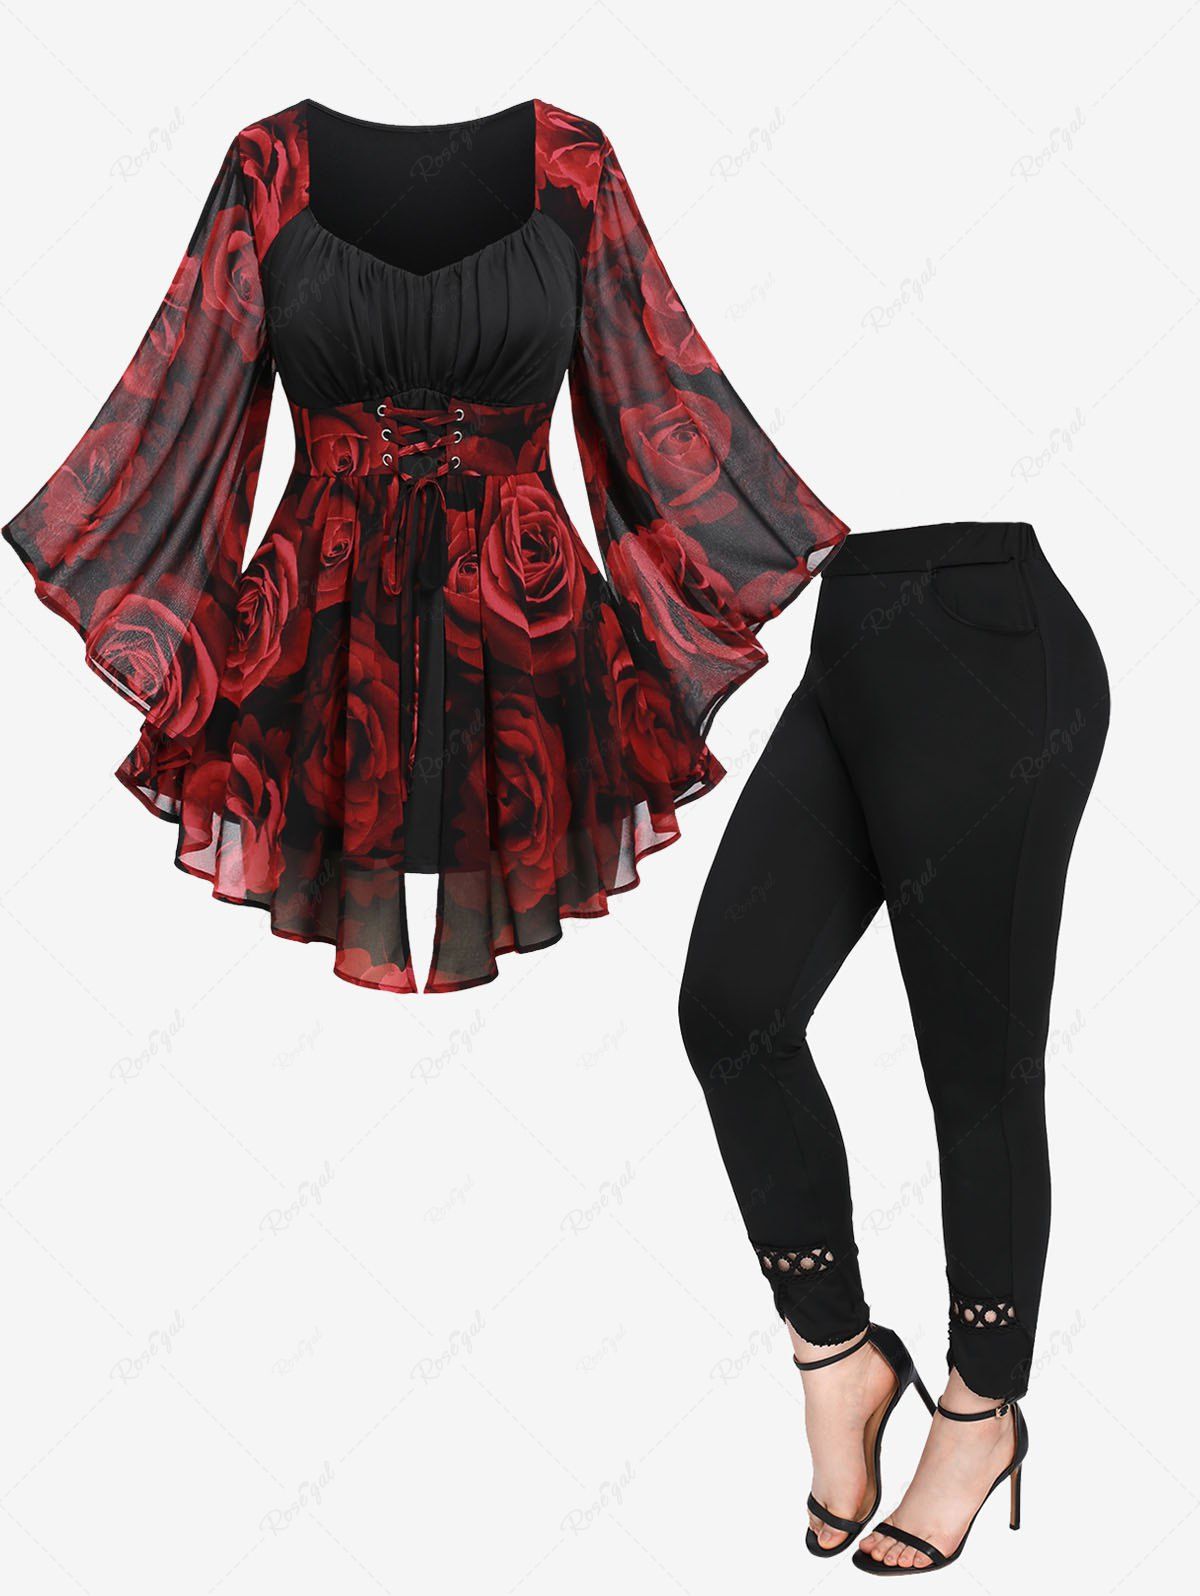 New Lace Up Floral Chiffon T-shirt and Hollow Out Lace Trim Pockets Leggings Plus Size Outfit  